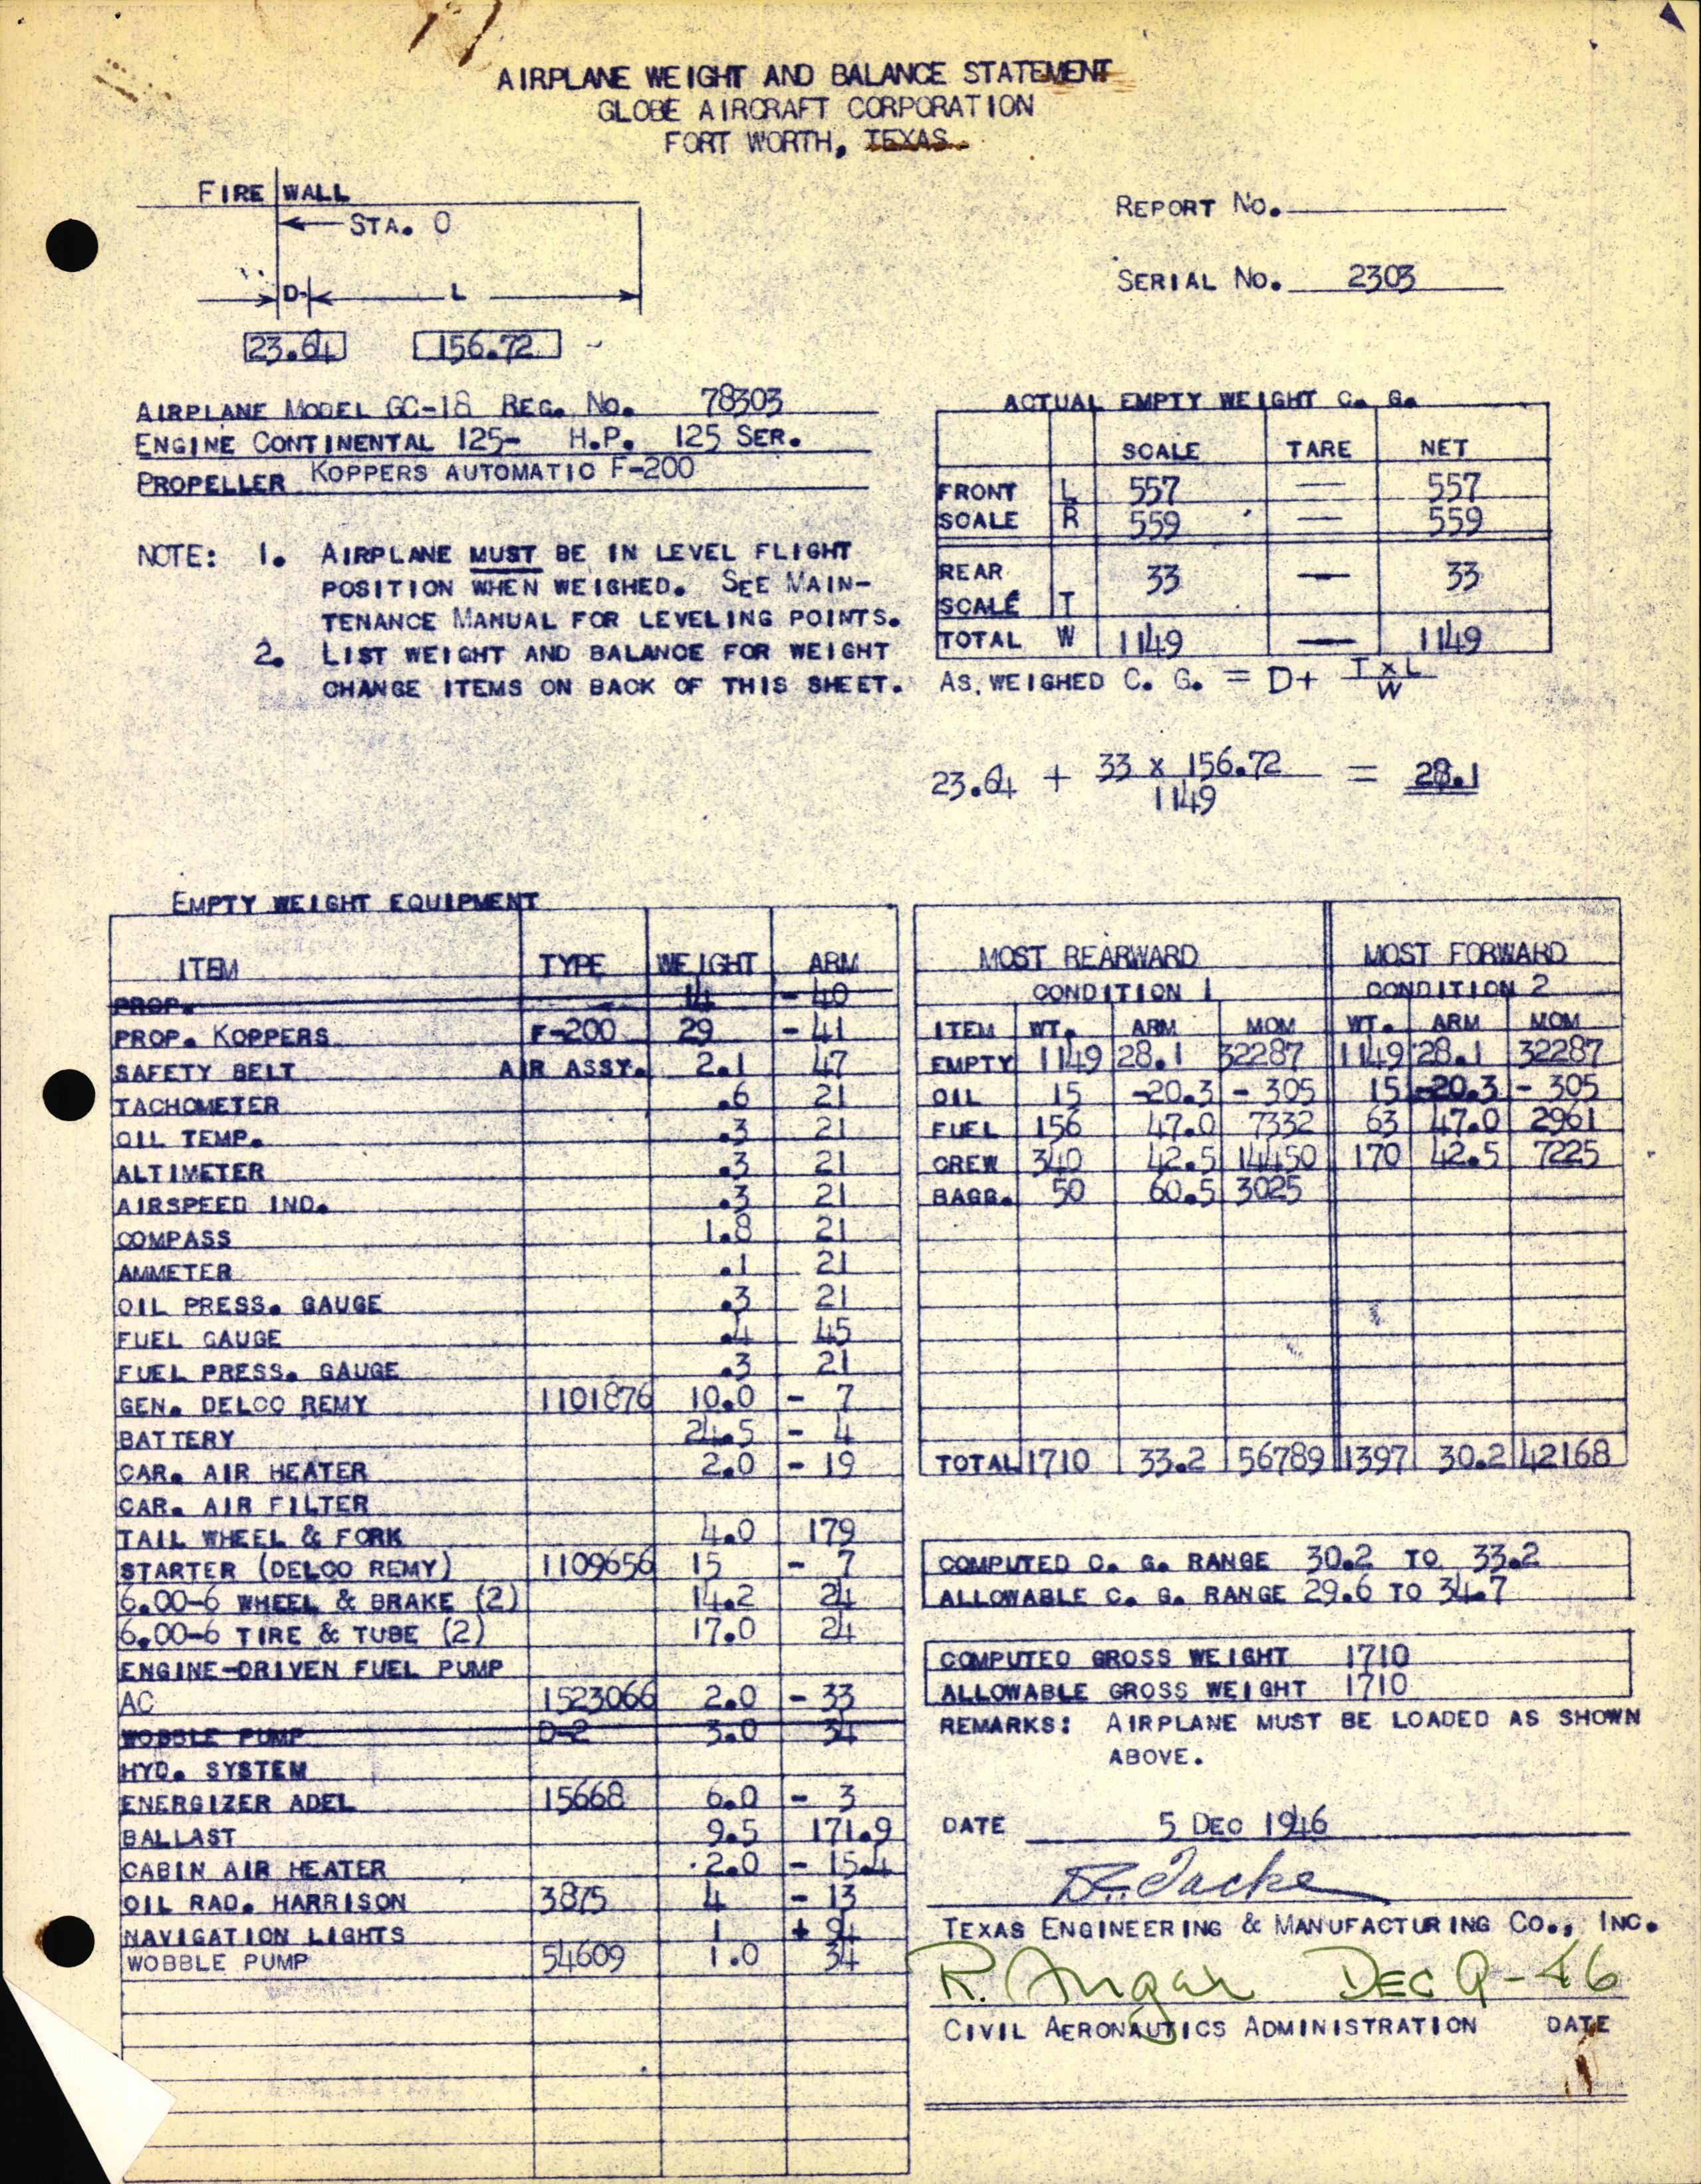 Sample page 1 from AirCorps Library document: Technical Information for Serial Number 2303